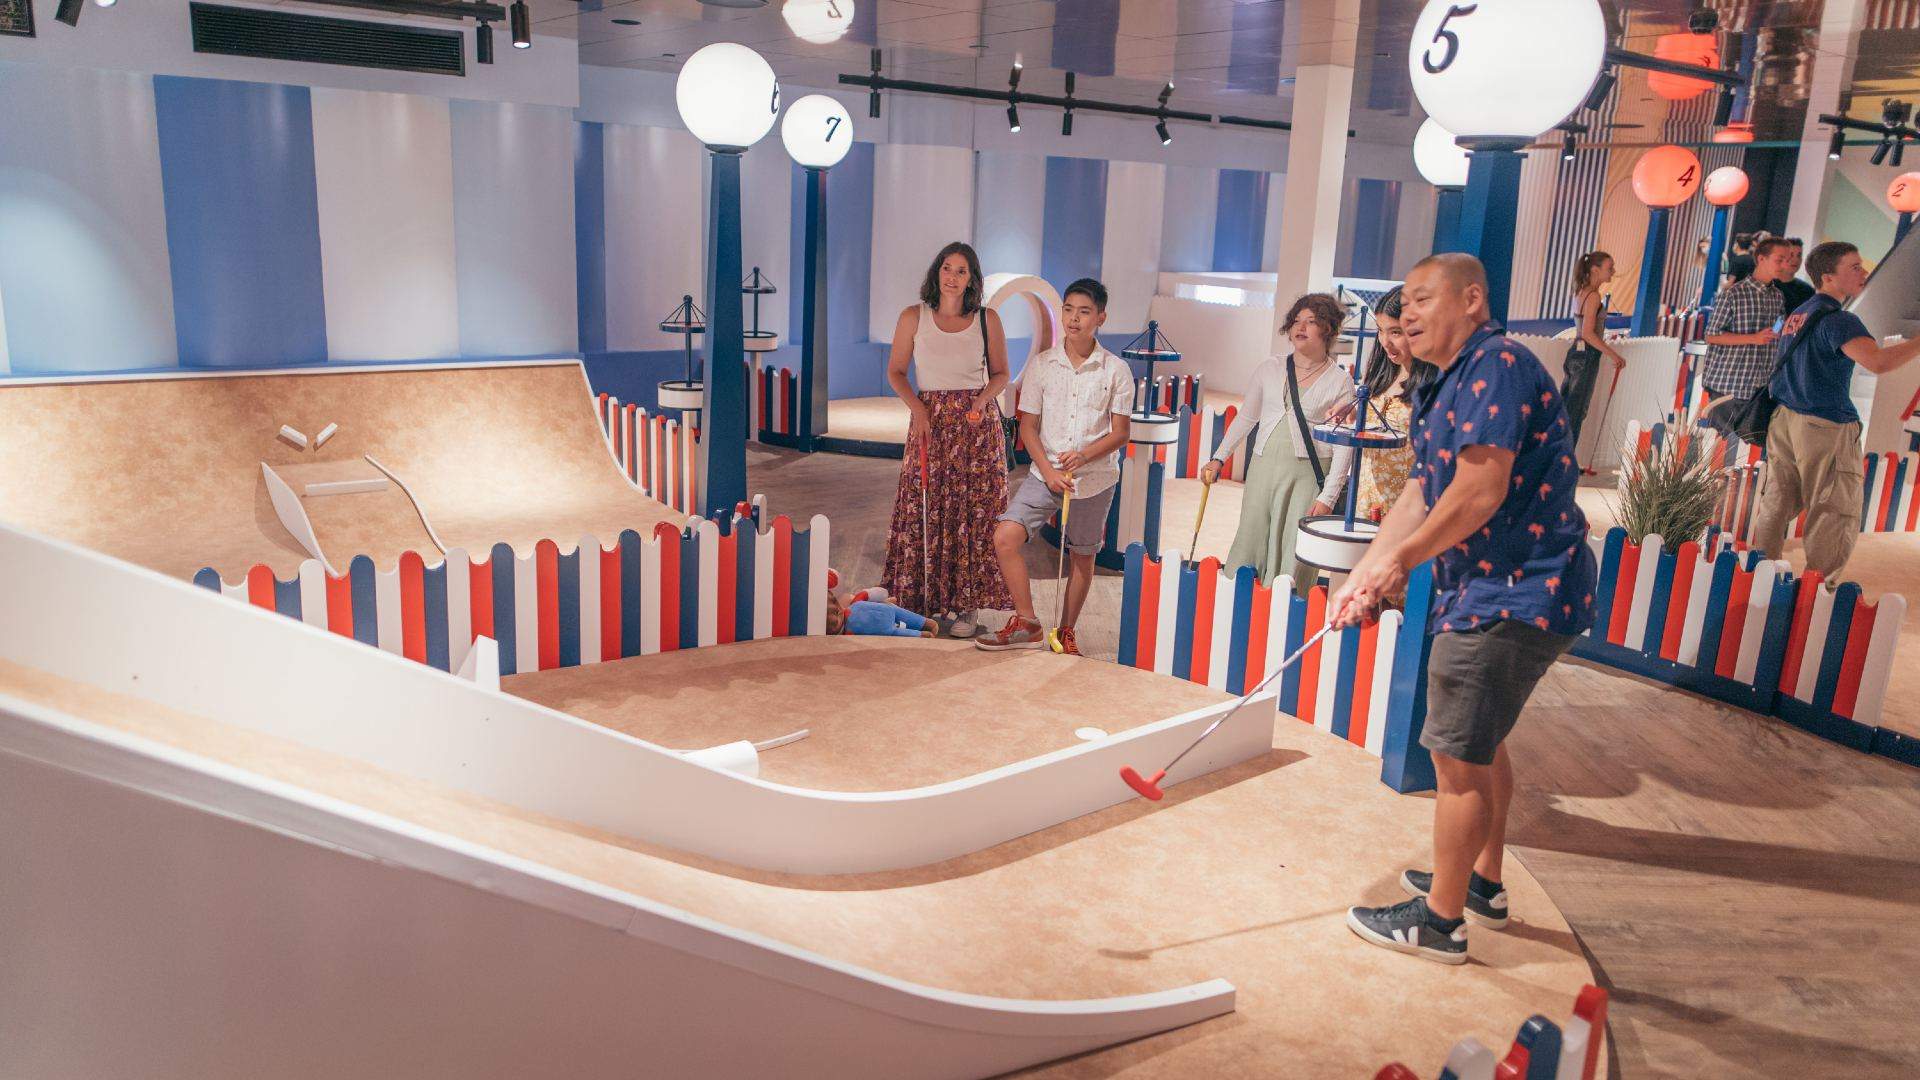 The Funderdome Is Melbourne's New Home of Competitive Thrills, Mini Golf and Karaoke